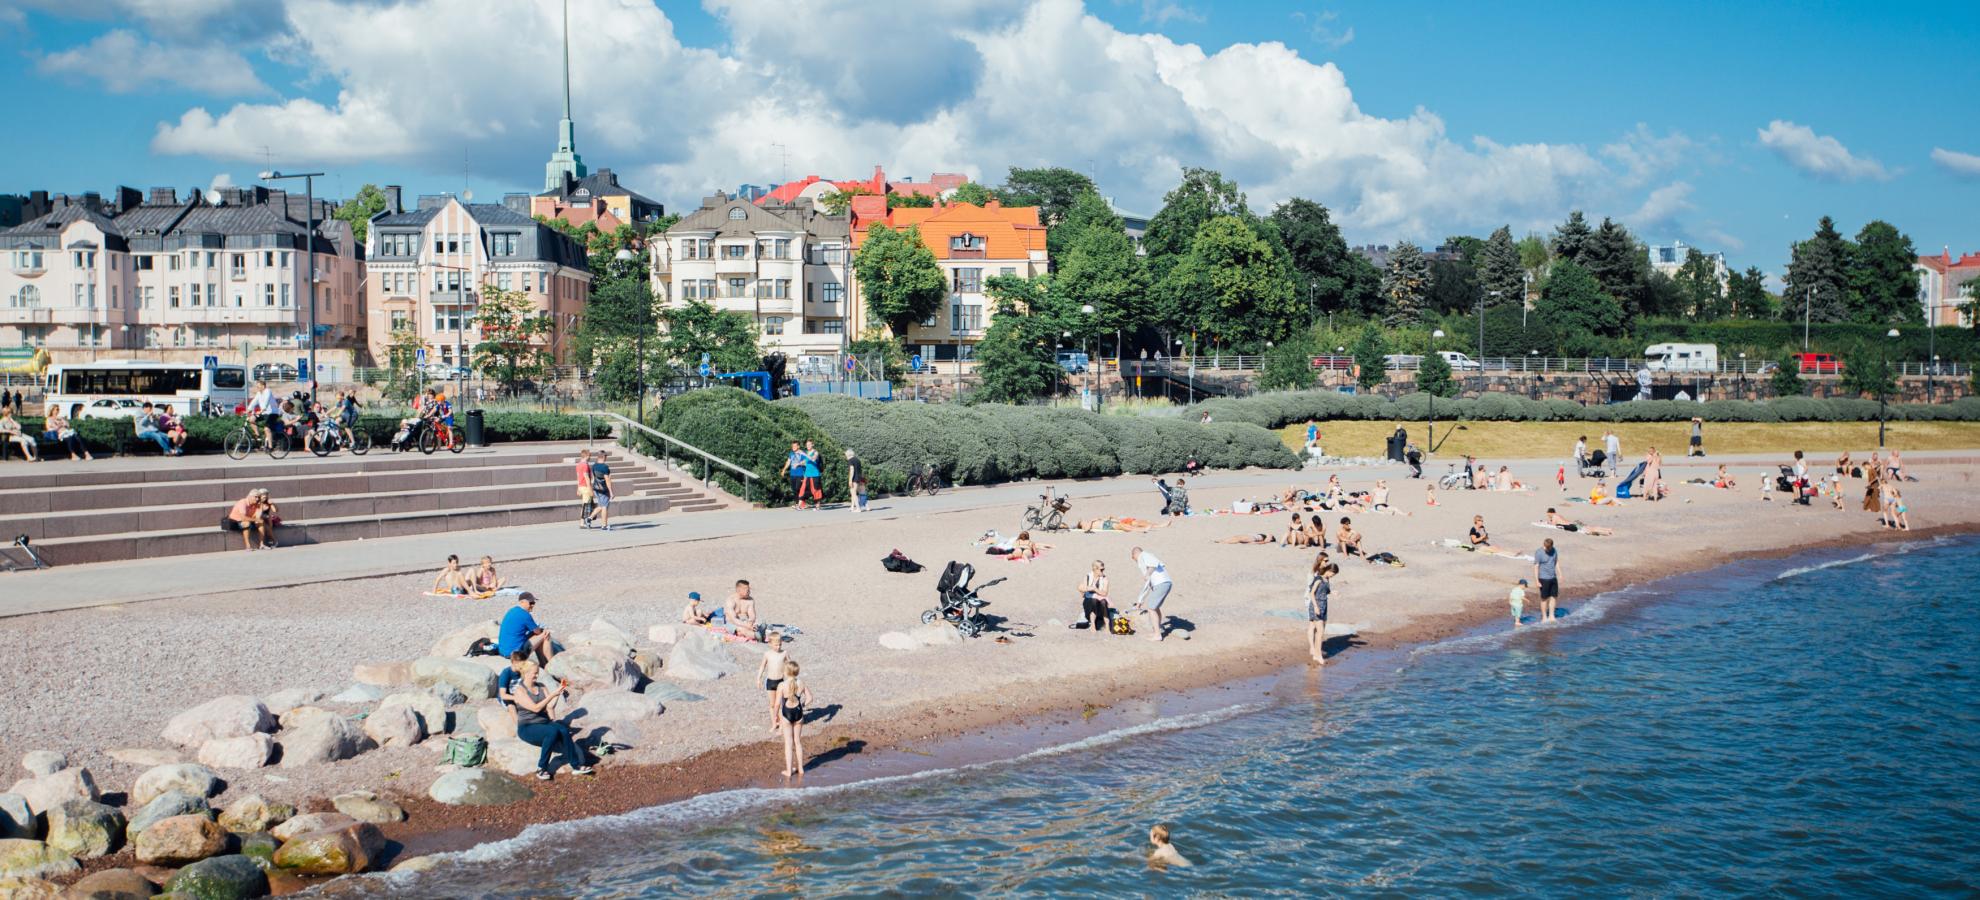 With the houses and apartments of Eira in the background against a blue sky, dozens of people lay scattered across Eiranranta beach, the sea lapping on the shore. 